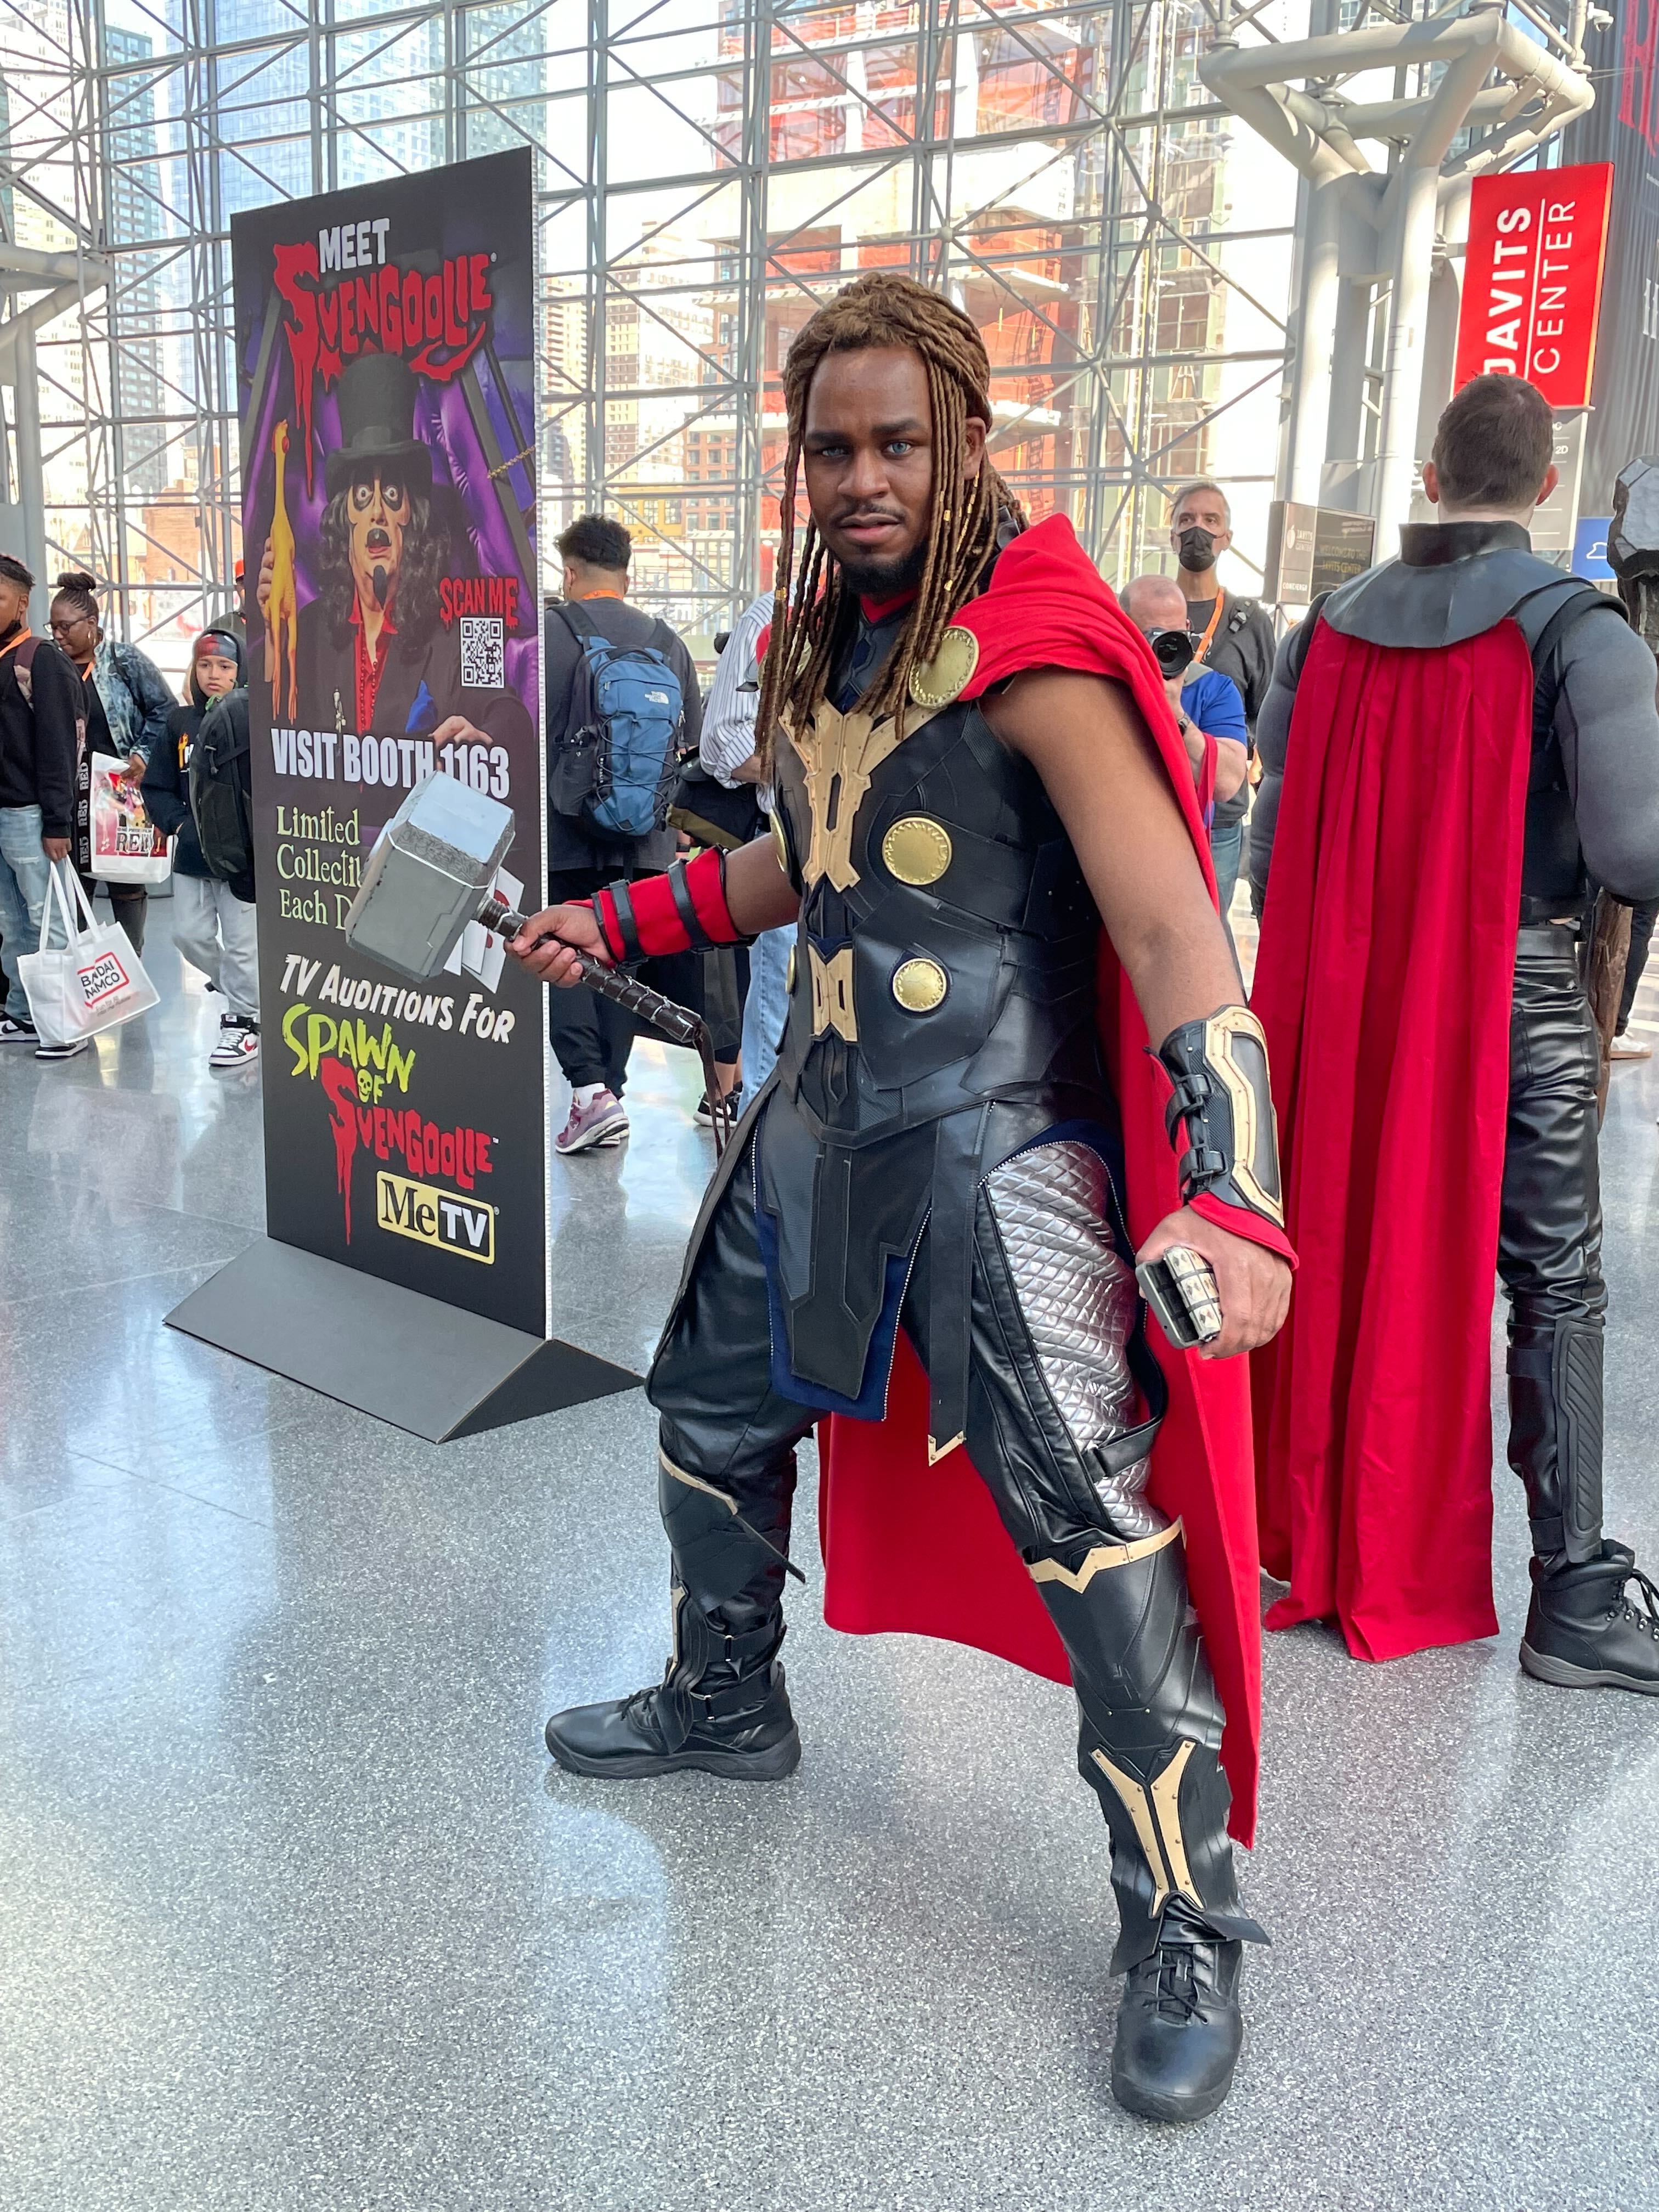 New York Comic Con Cosplay - cosplay - Meet Visit Boot 163 Lhid Cold Each 17 Tv Auditions For Spann MeTV Mer Javits Center